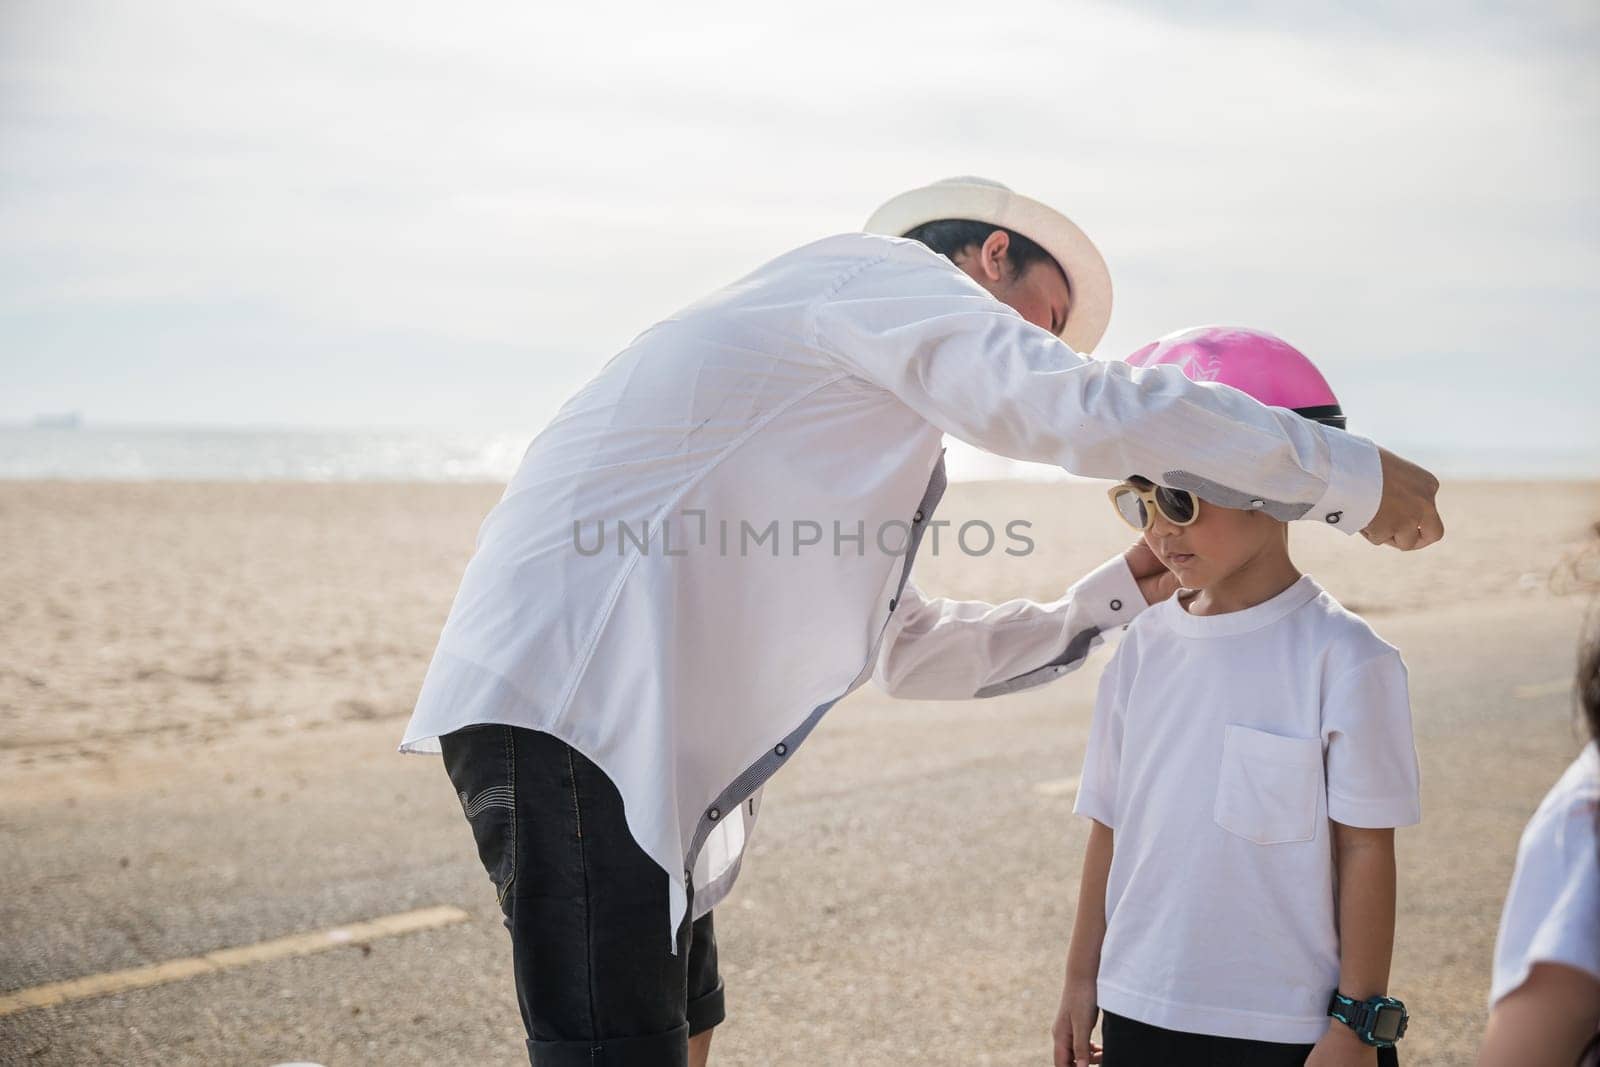 In the warm sunlight of beach day father dons a safety helmet offering inspiration and safety he teaches his cheerful son exciting skill of riding a bicycle a beautiful moment of family connection. by Sorapop